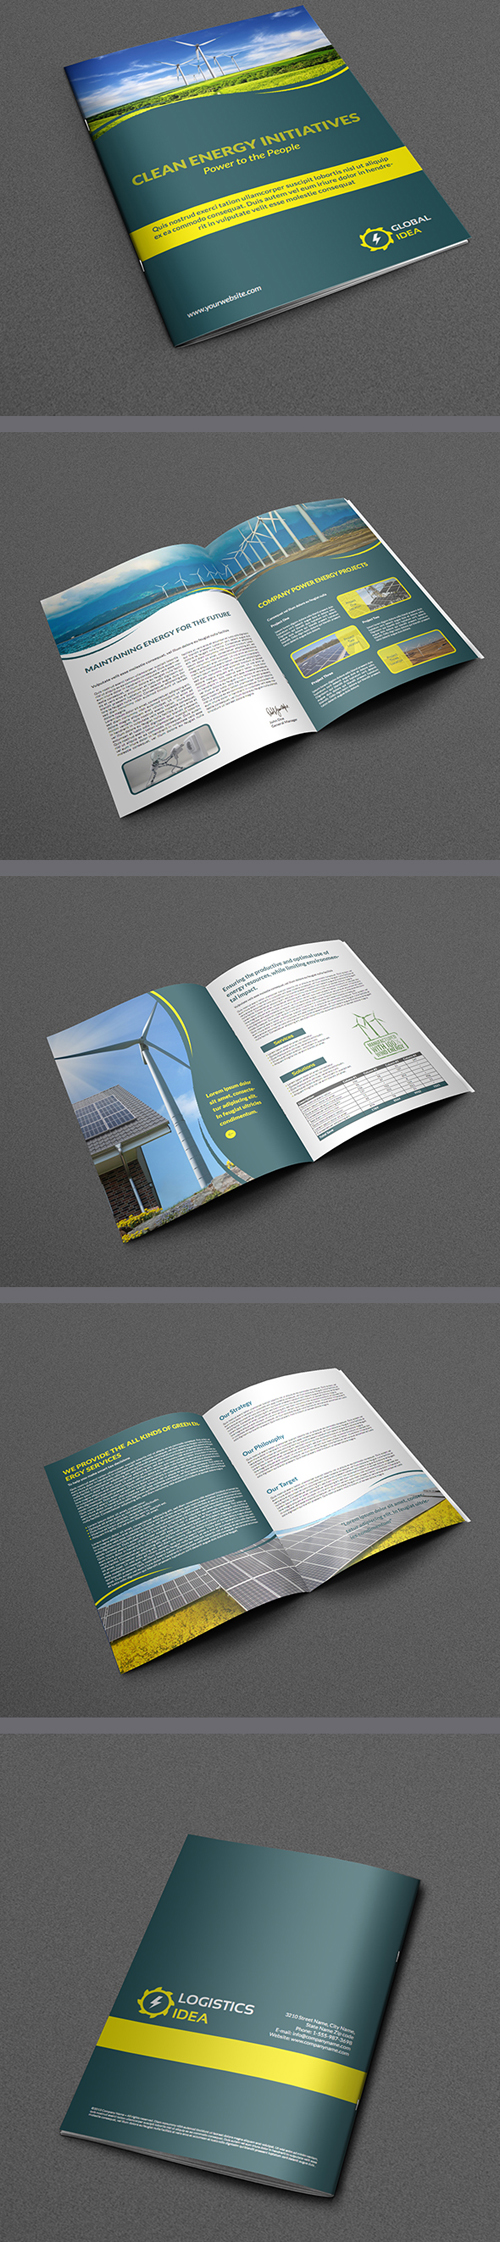 Power Energy Services Brochure Template